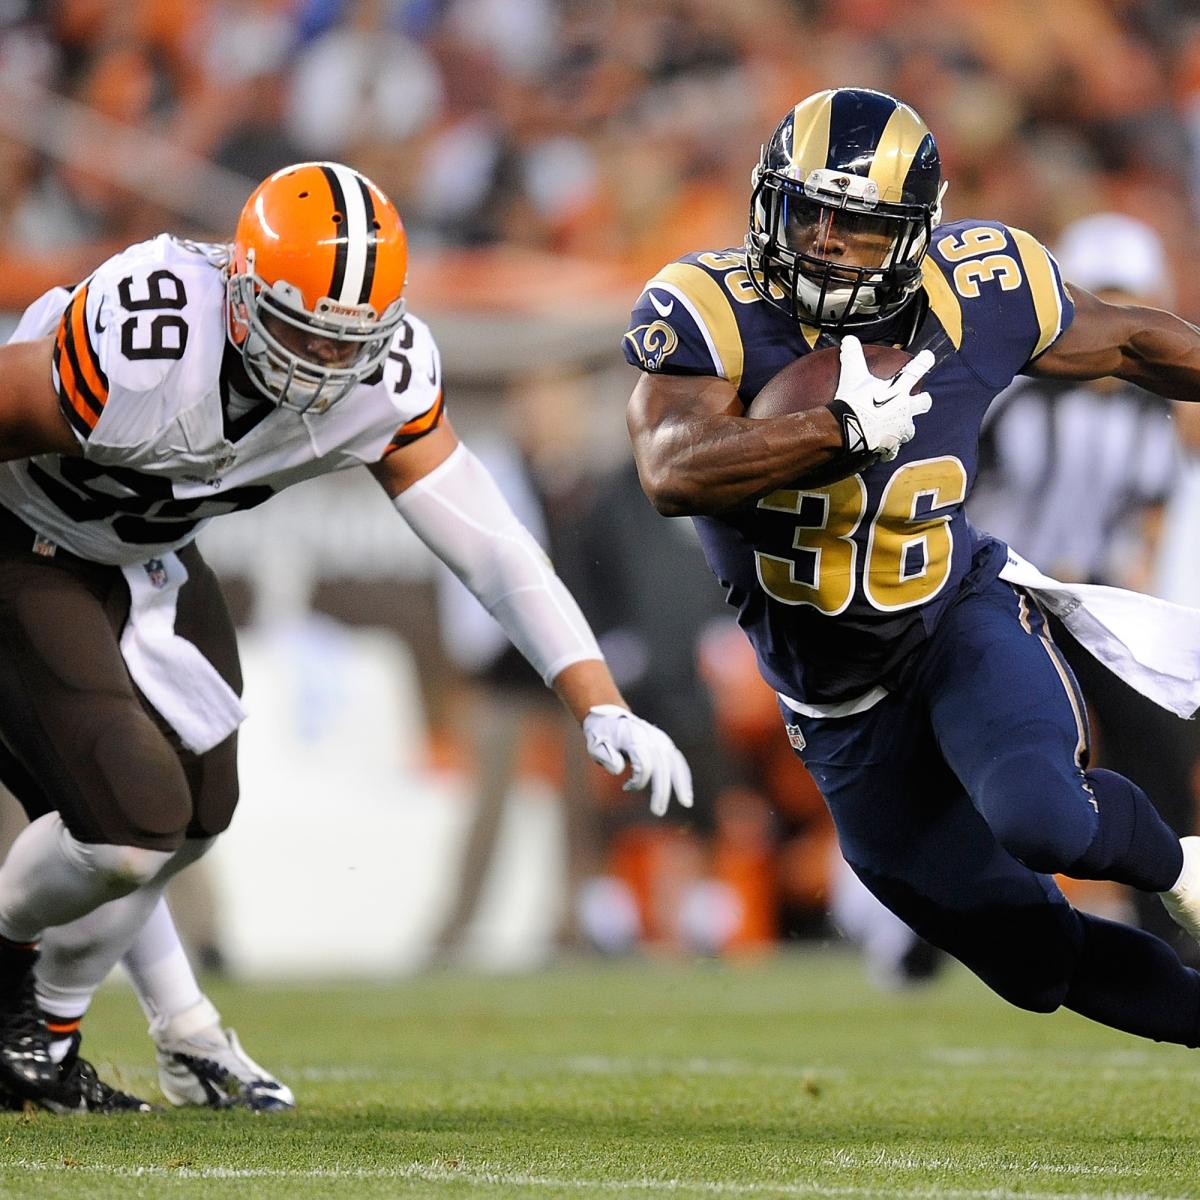 St. Louis Rams vs. Cleveland Browns: Live Score, Highlights and Analysis | Bleacher Report ...